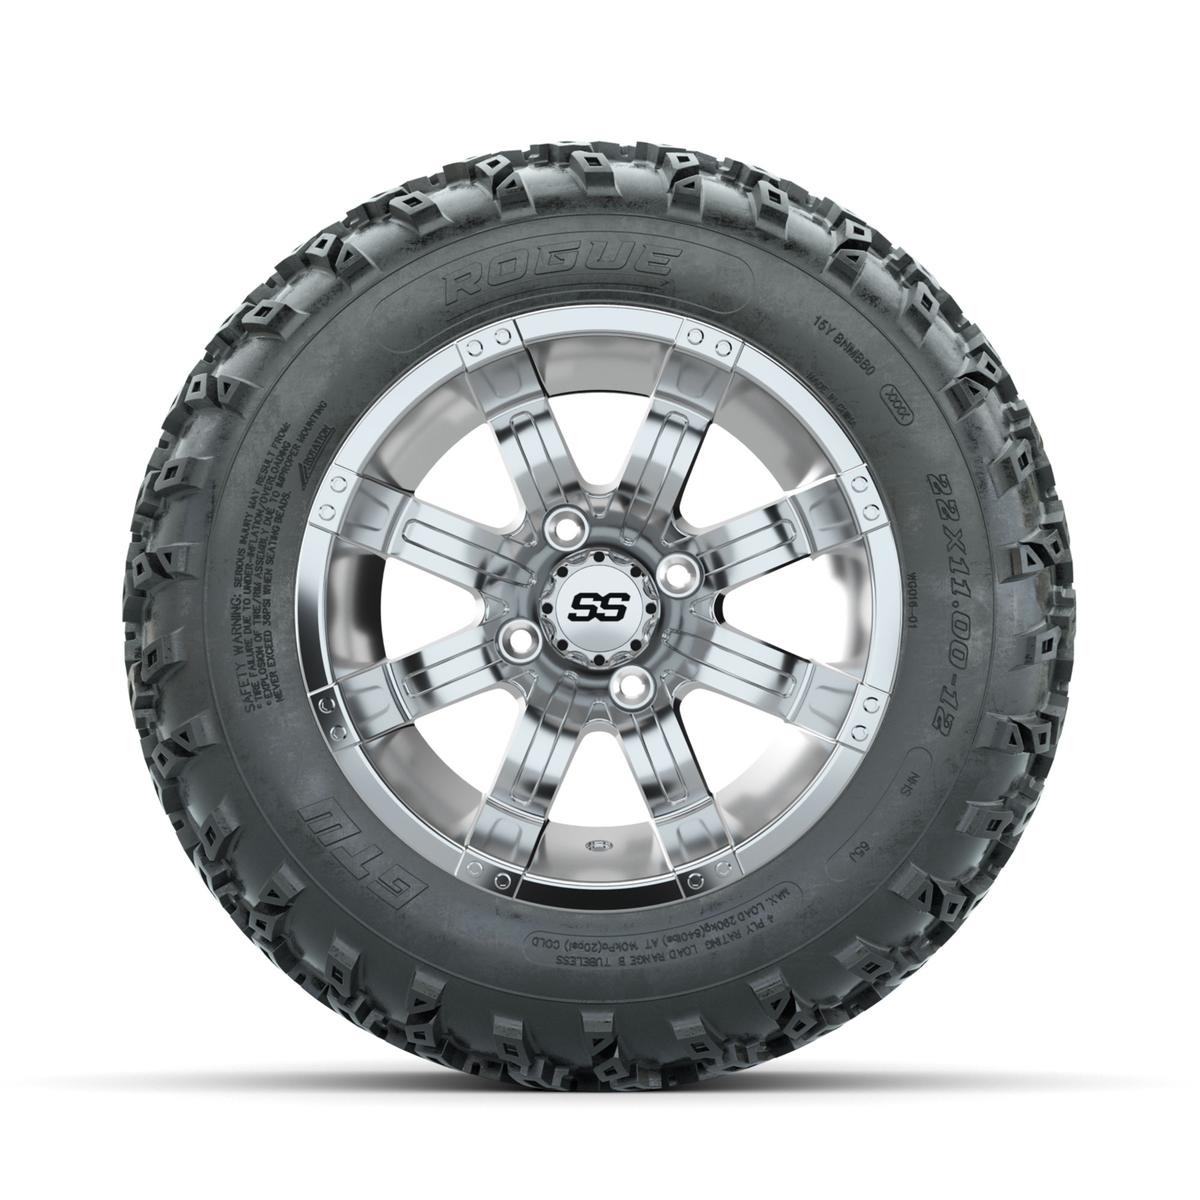 GTW Tempest Chrome 12 in Wheels with 22x11.00-12 Rogue All Terrain Tires – Full Set